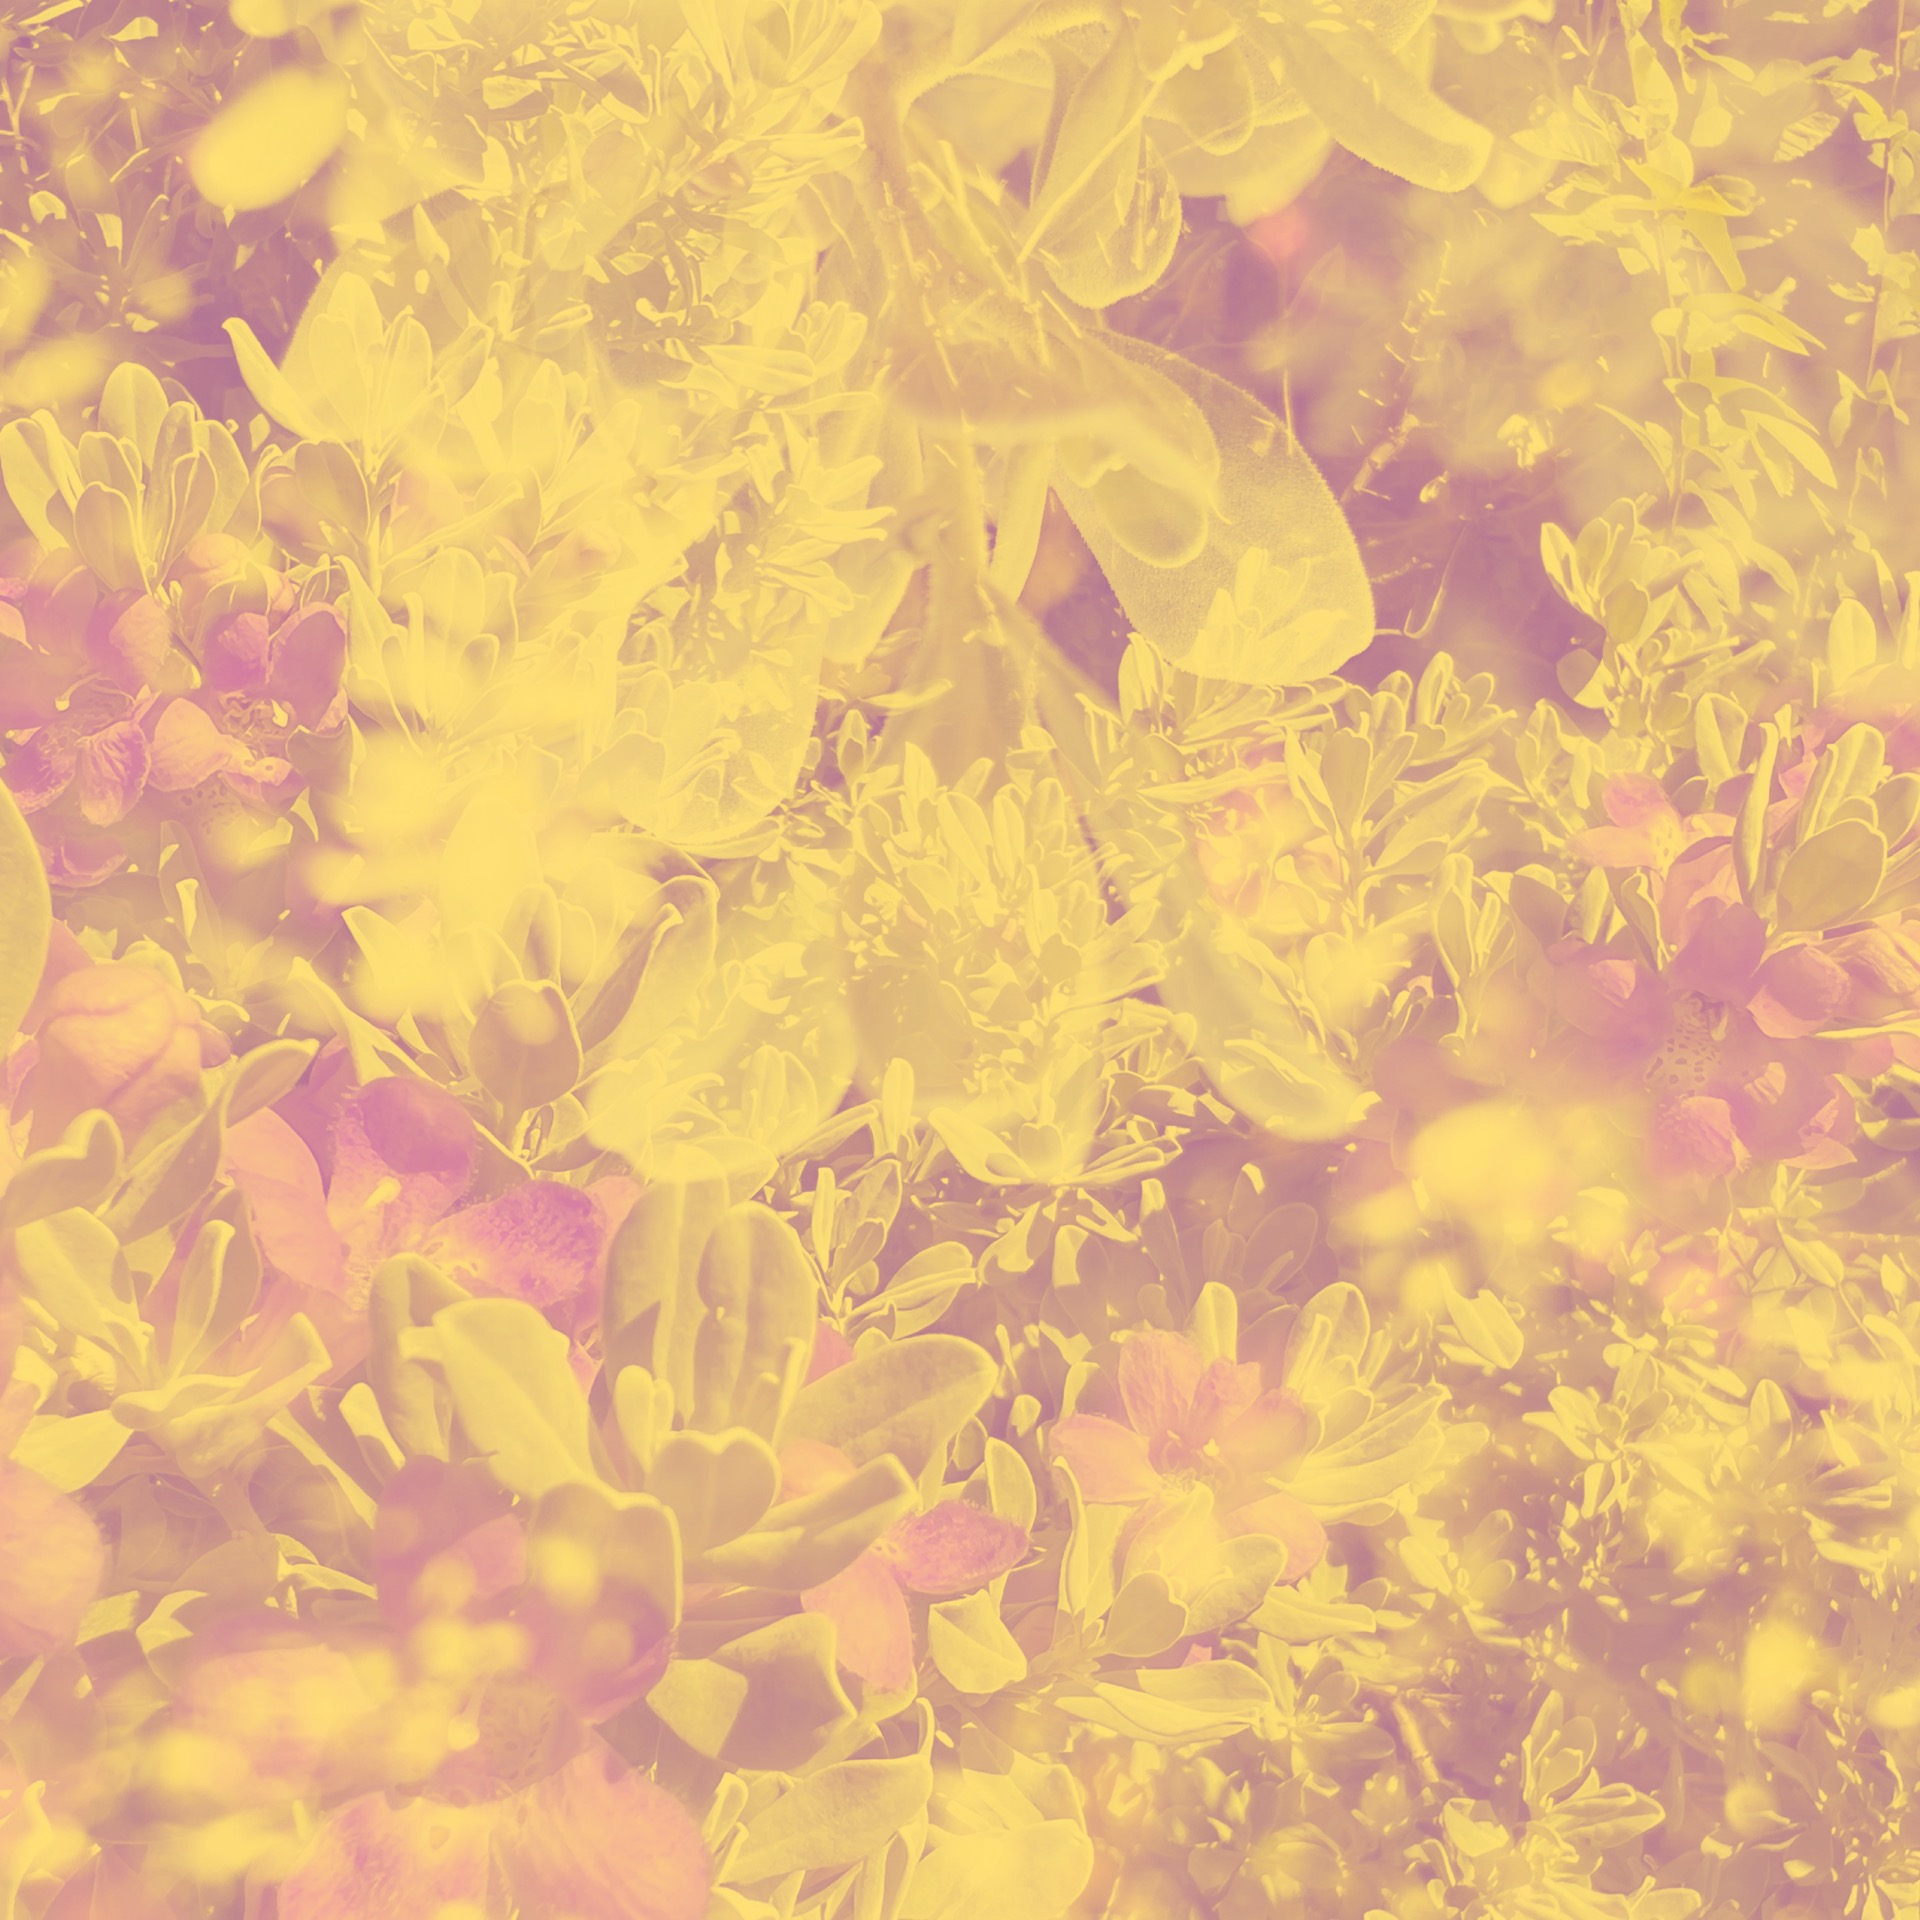 Album art for the album “22”. Trademark double exposure closeups of Texas Purple Sage, overlaid with a yellow hue. This one is distinctly different from the “19” cover.